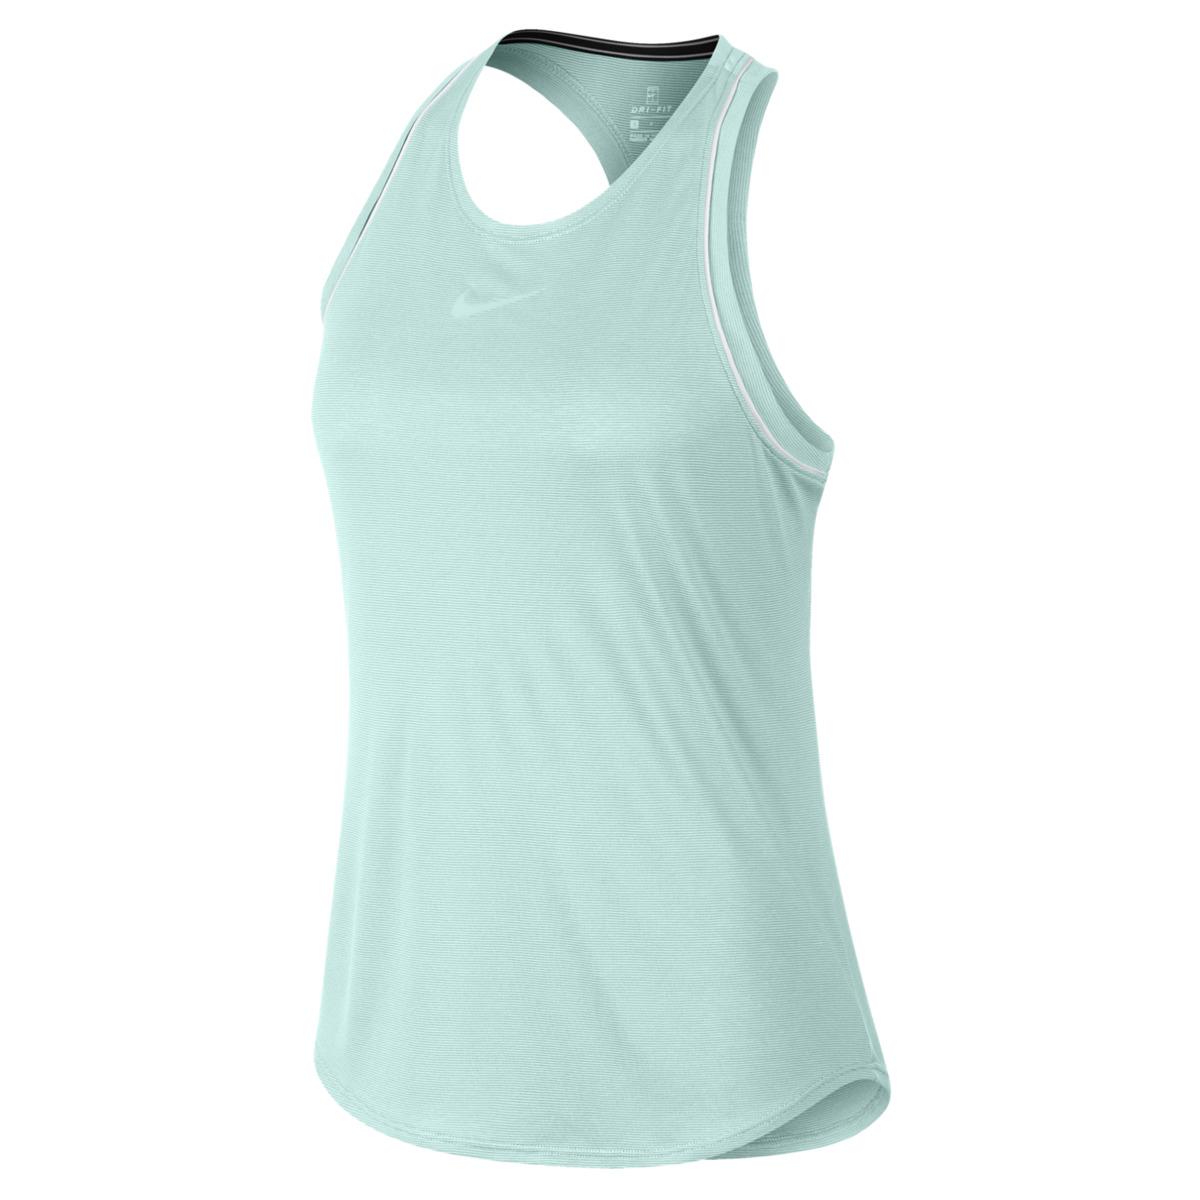 Nike Synthetic Court Dri-fit T-shirt in Mint Green (Green) - Lyst